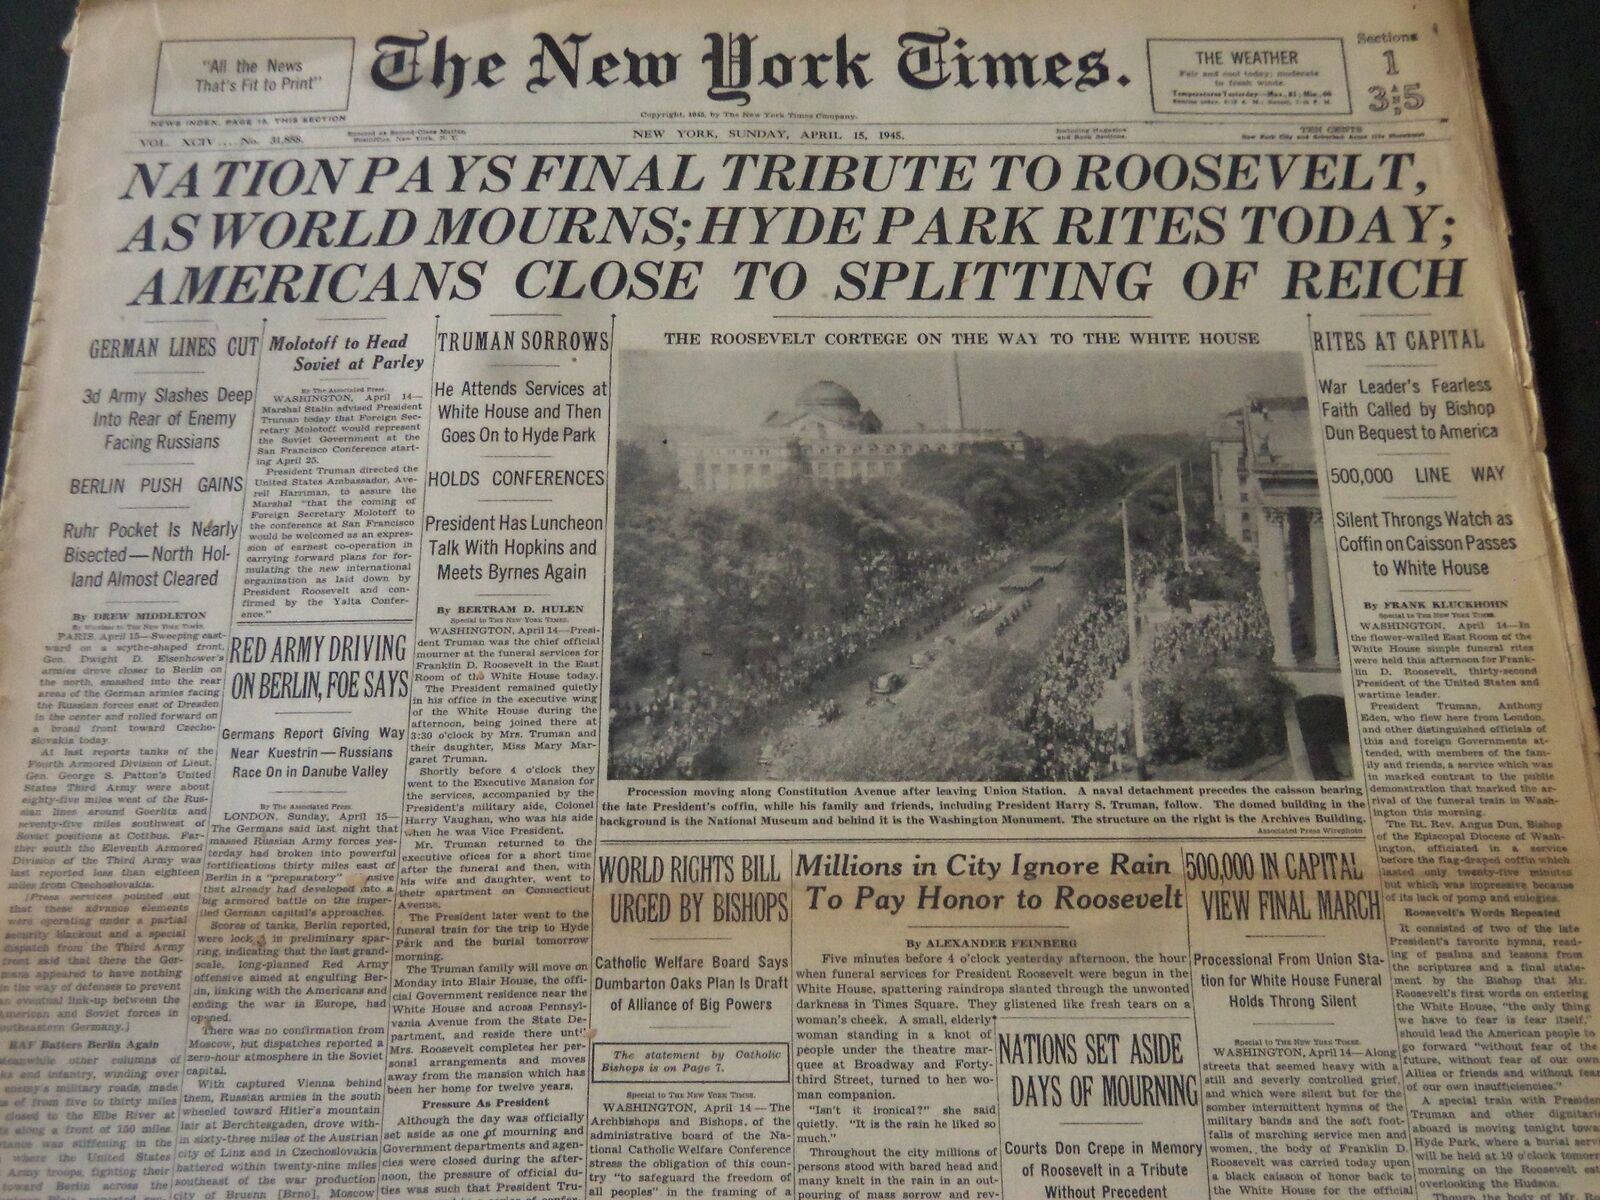 1945 APRIL 15 NEW YORK TIMES - NATION PAYS FINAL TRIBUTE TO ROOSEVELT - NT 6000